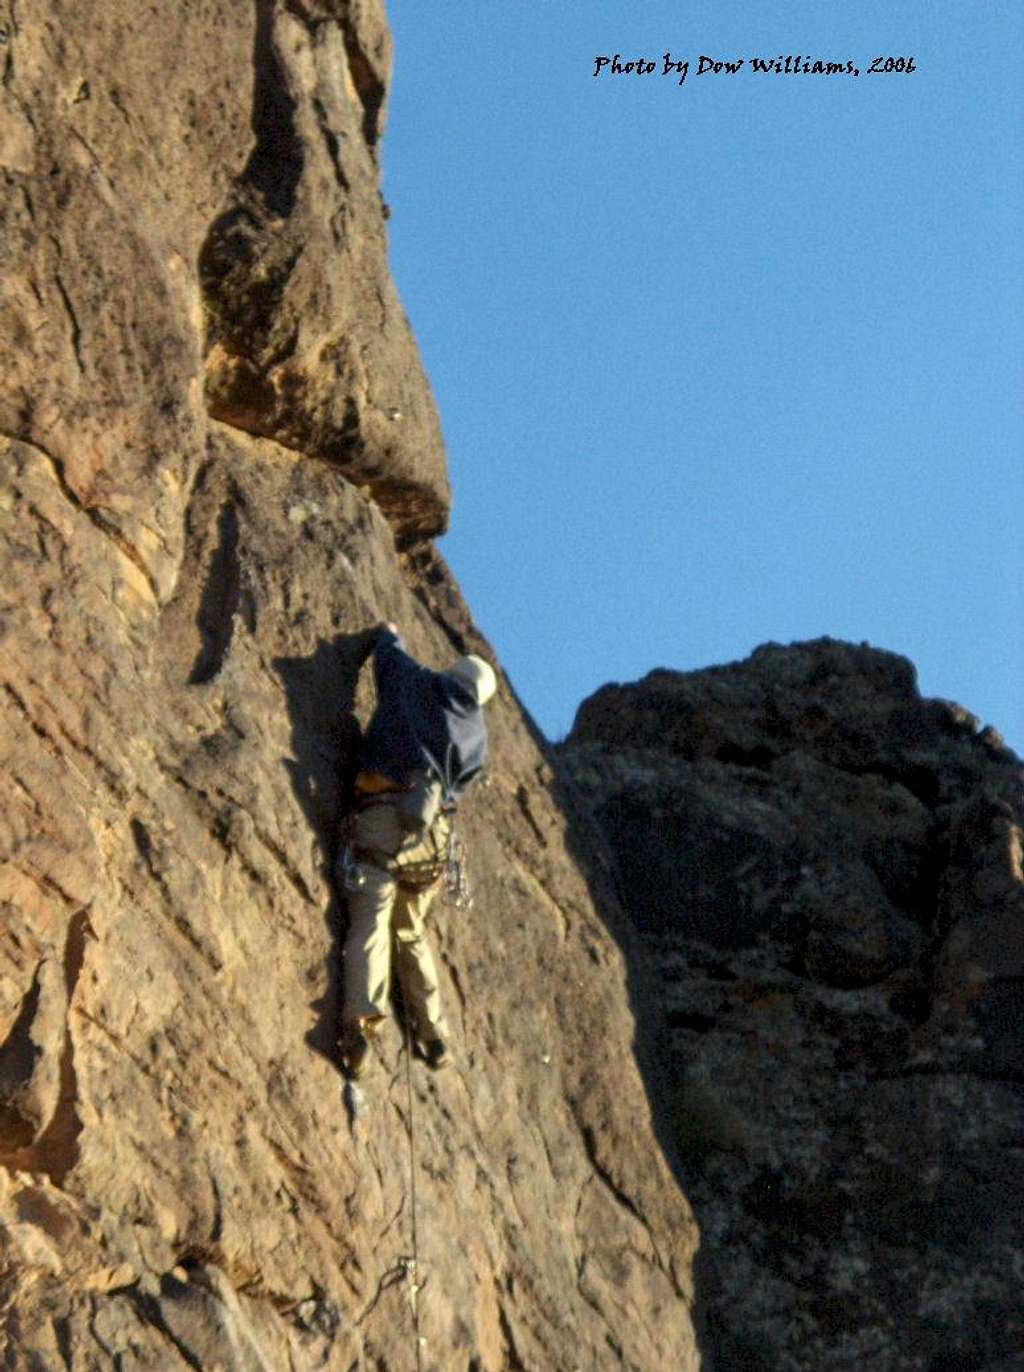 What was I Thinking, 5.10c